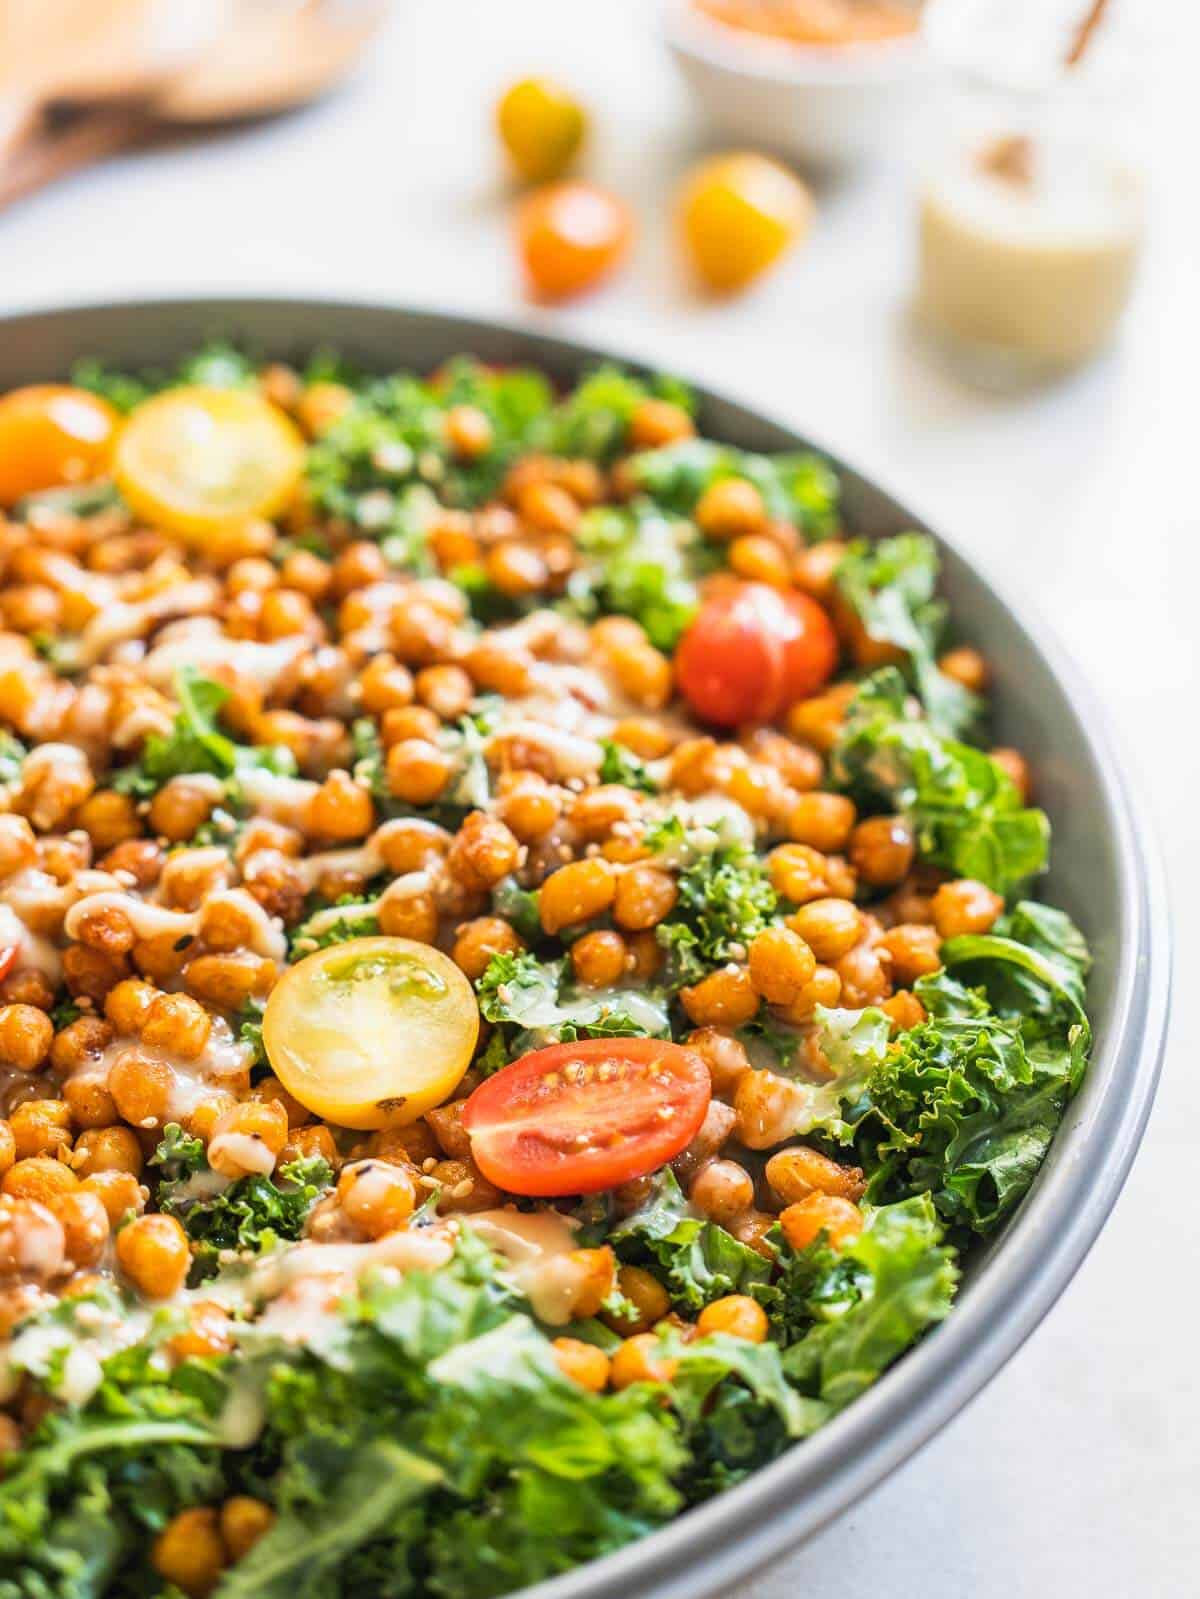 crispy chickpea and kale salad drizzled with tahini dressing.